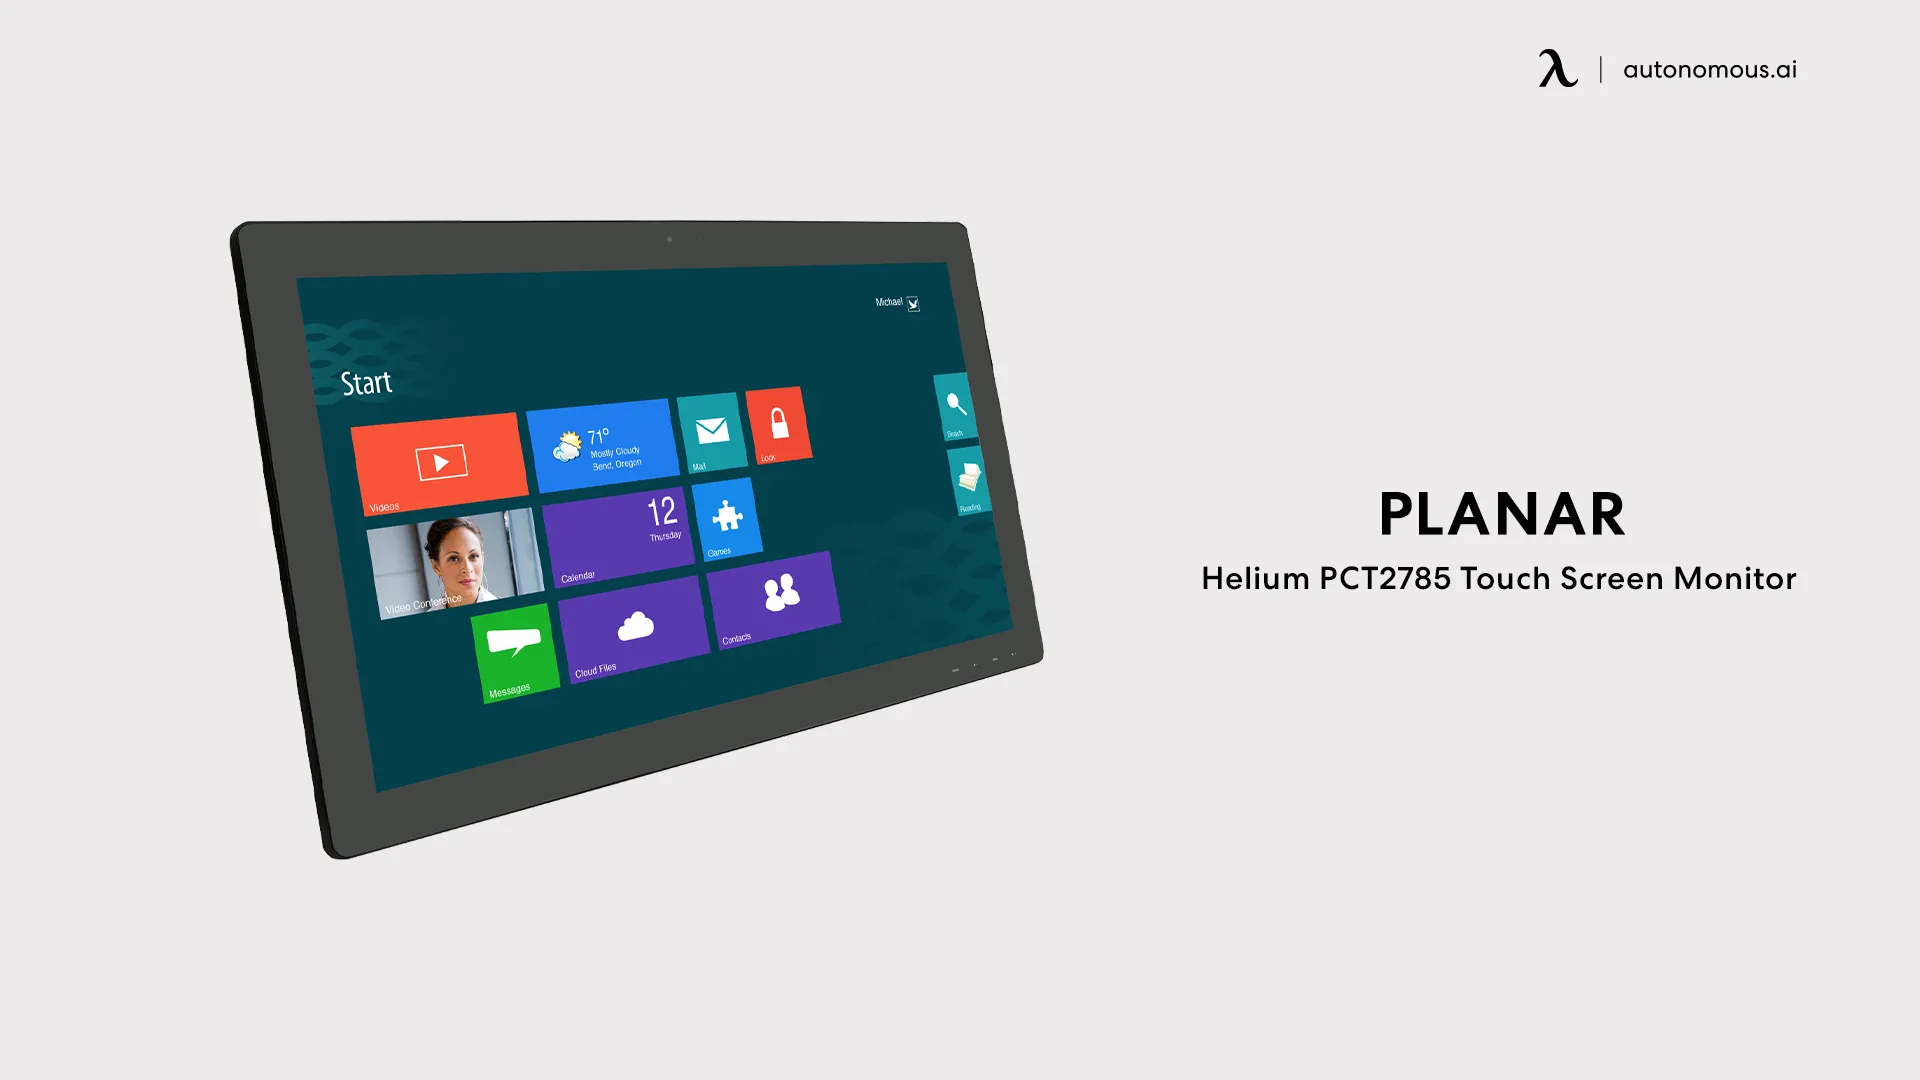 Planar Helium PCT2785 Large Touch Screen Monitor